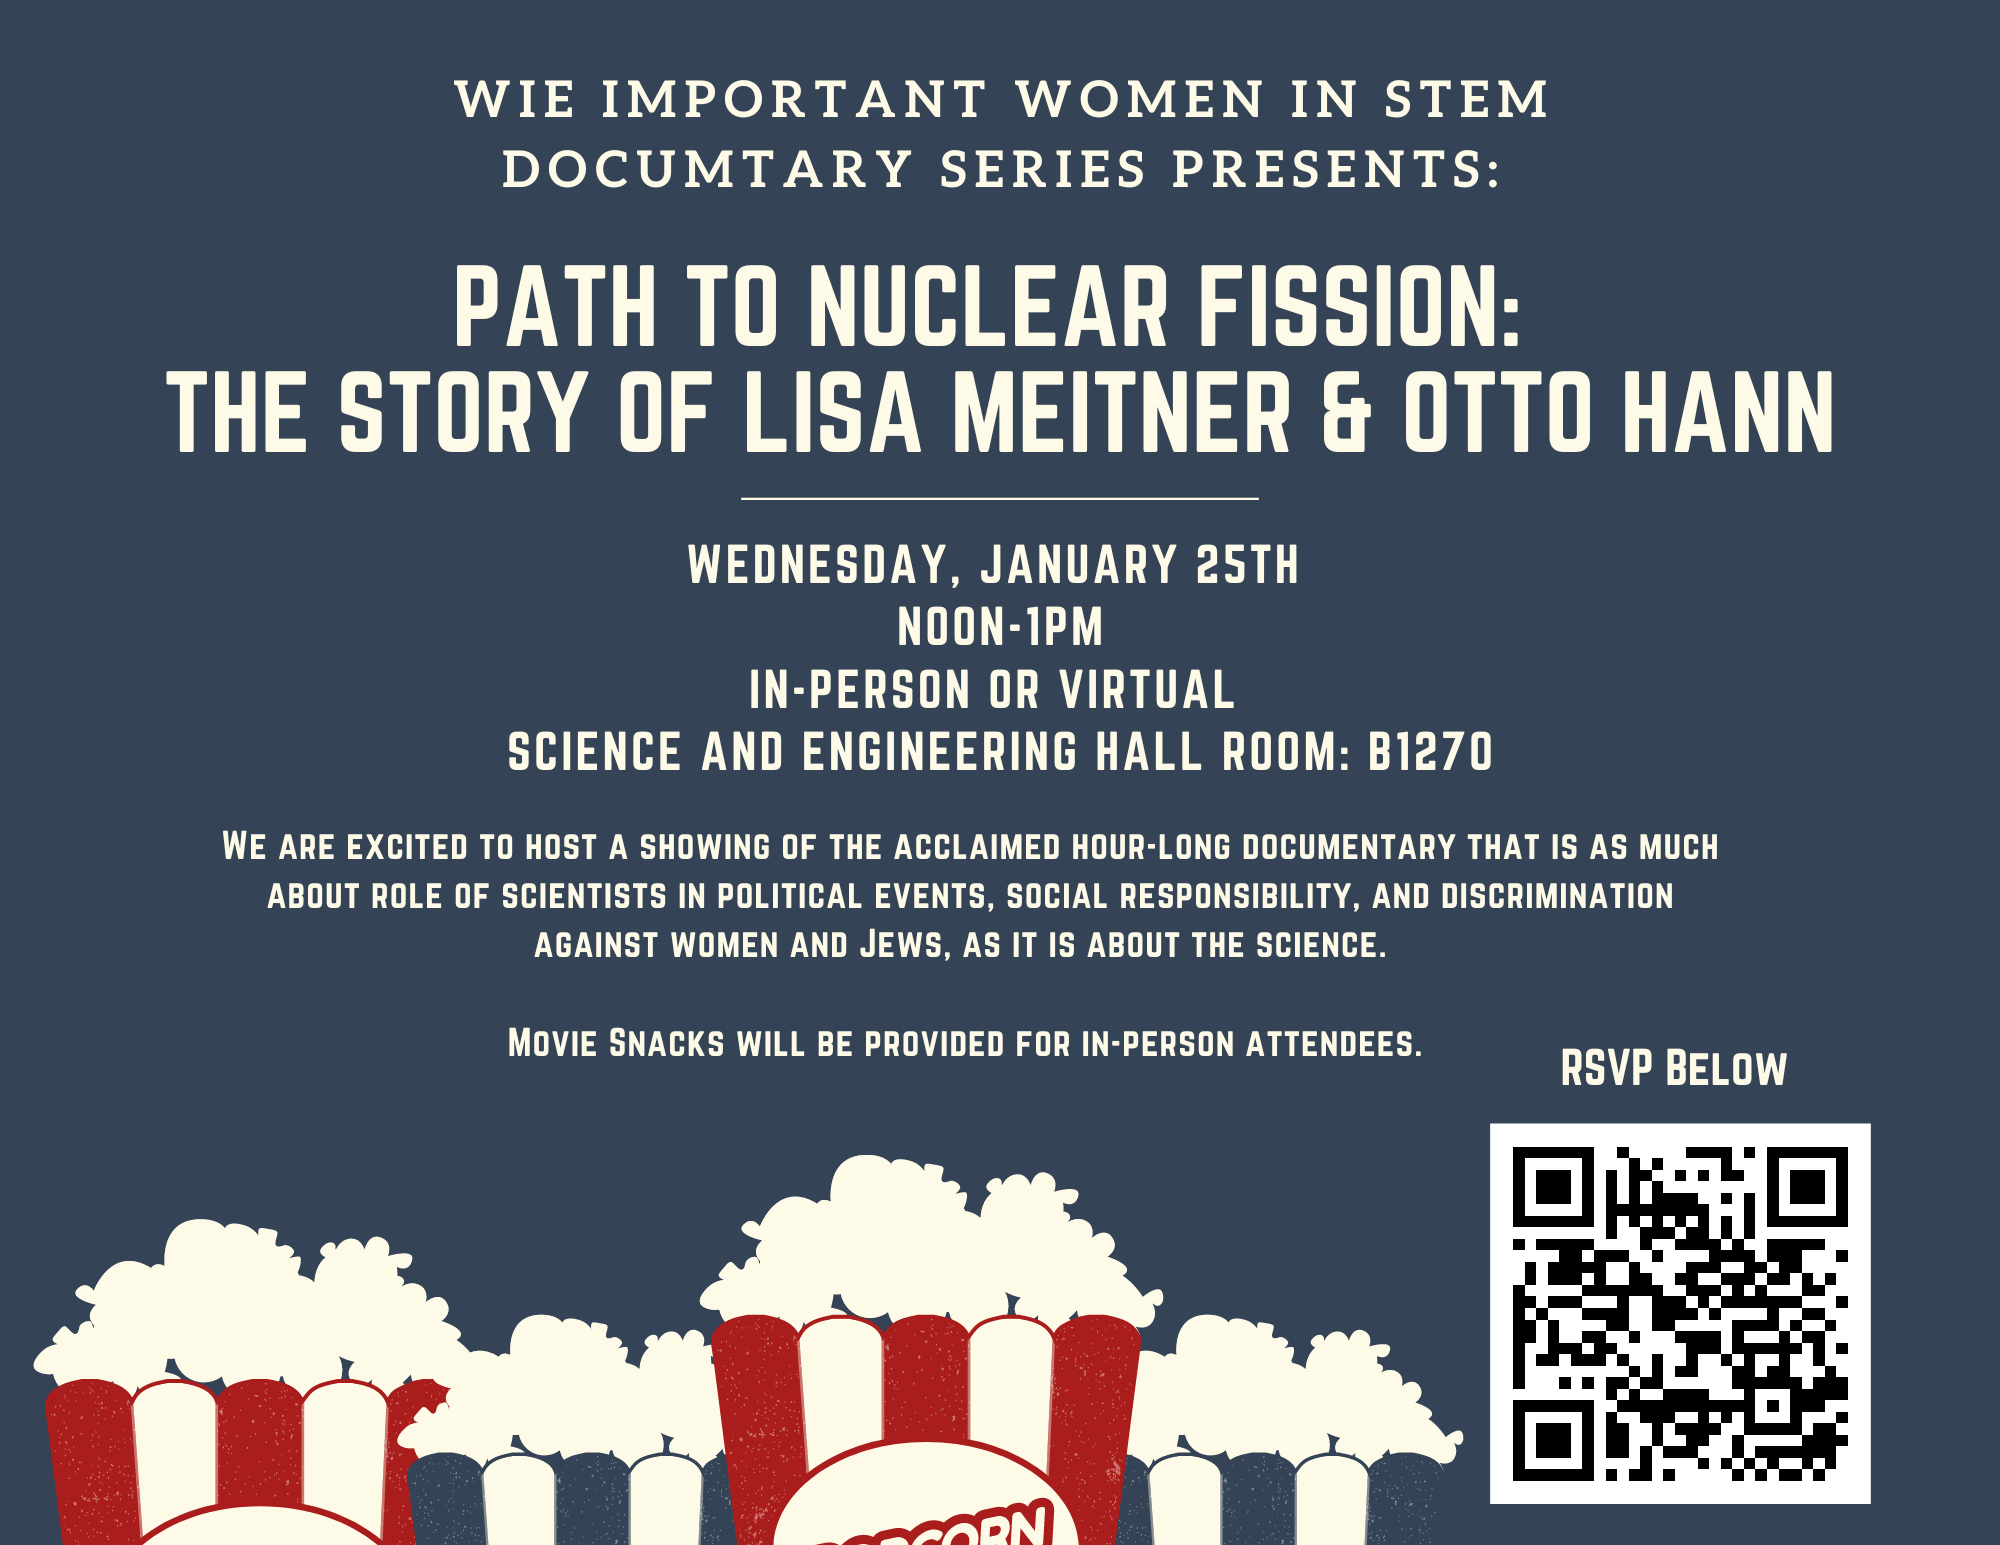 Wie Women in STEM Documentary Series Presents: The Story of Nuclear Fission: Lise Meitner & Otto Hahn. Jan. 25h 12-1pm